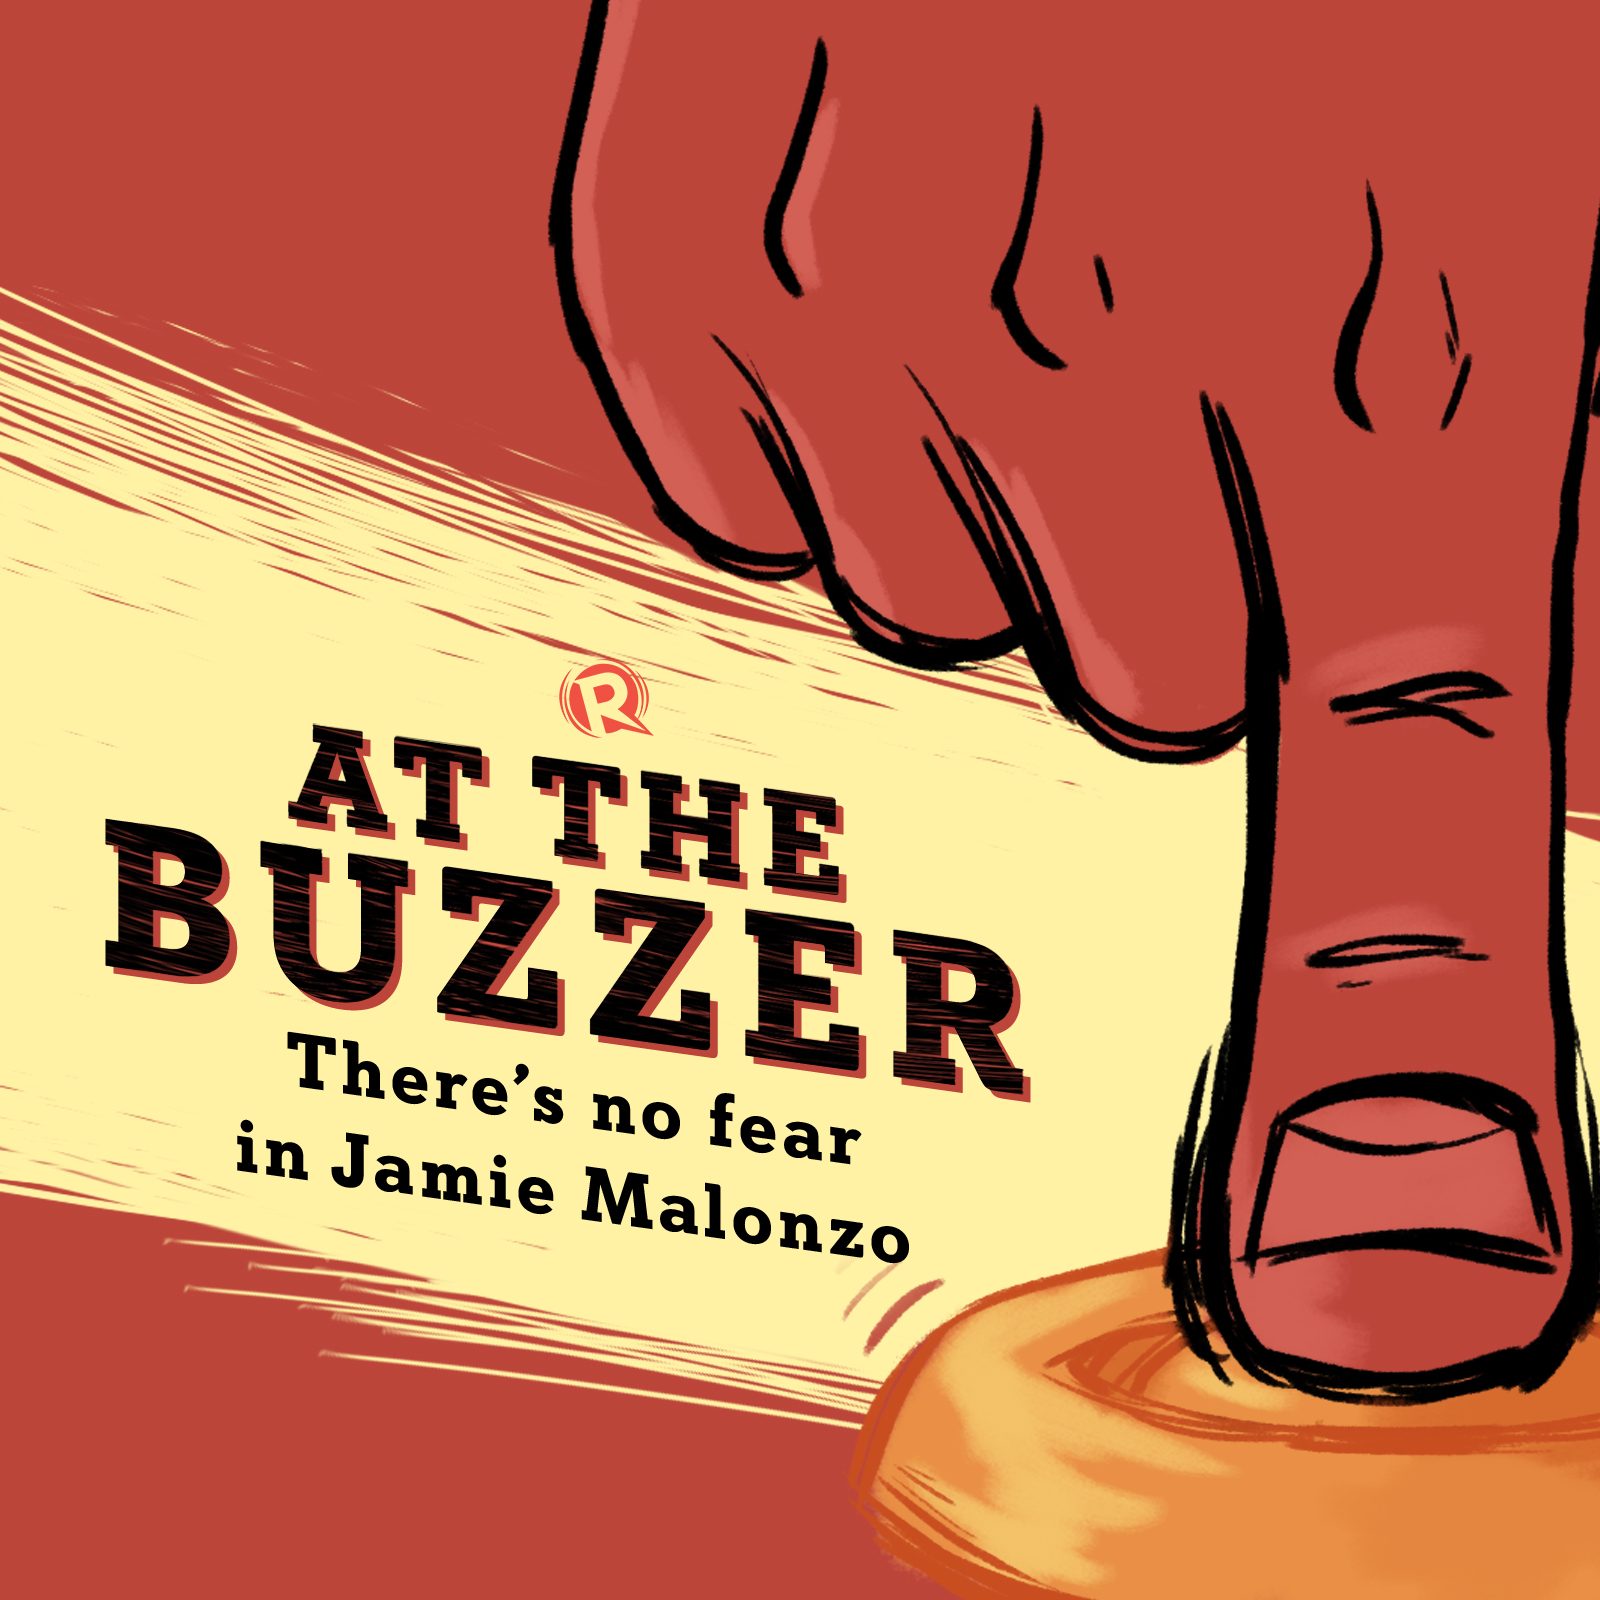 [PODCAST] At The Buzzer: There’s no fear in Jamie Malonzo